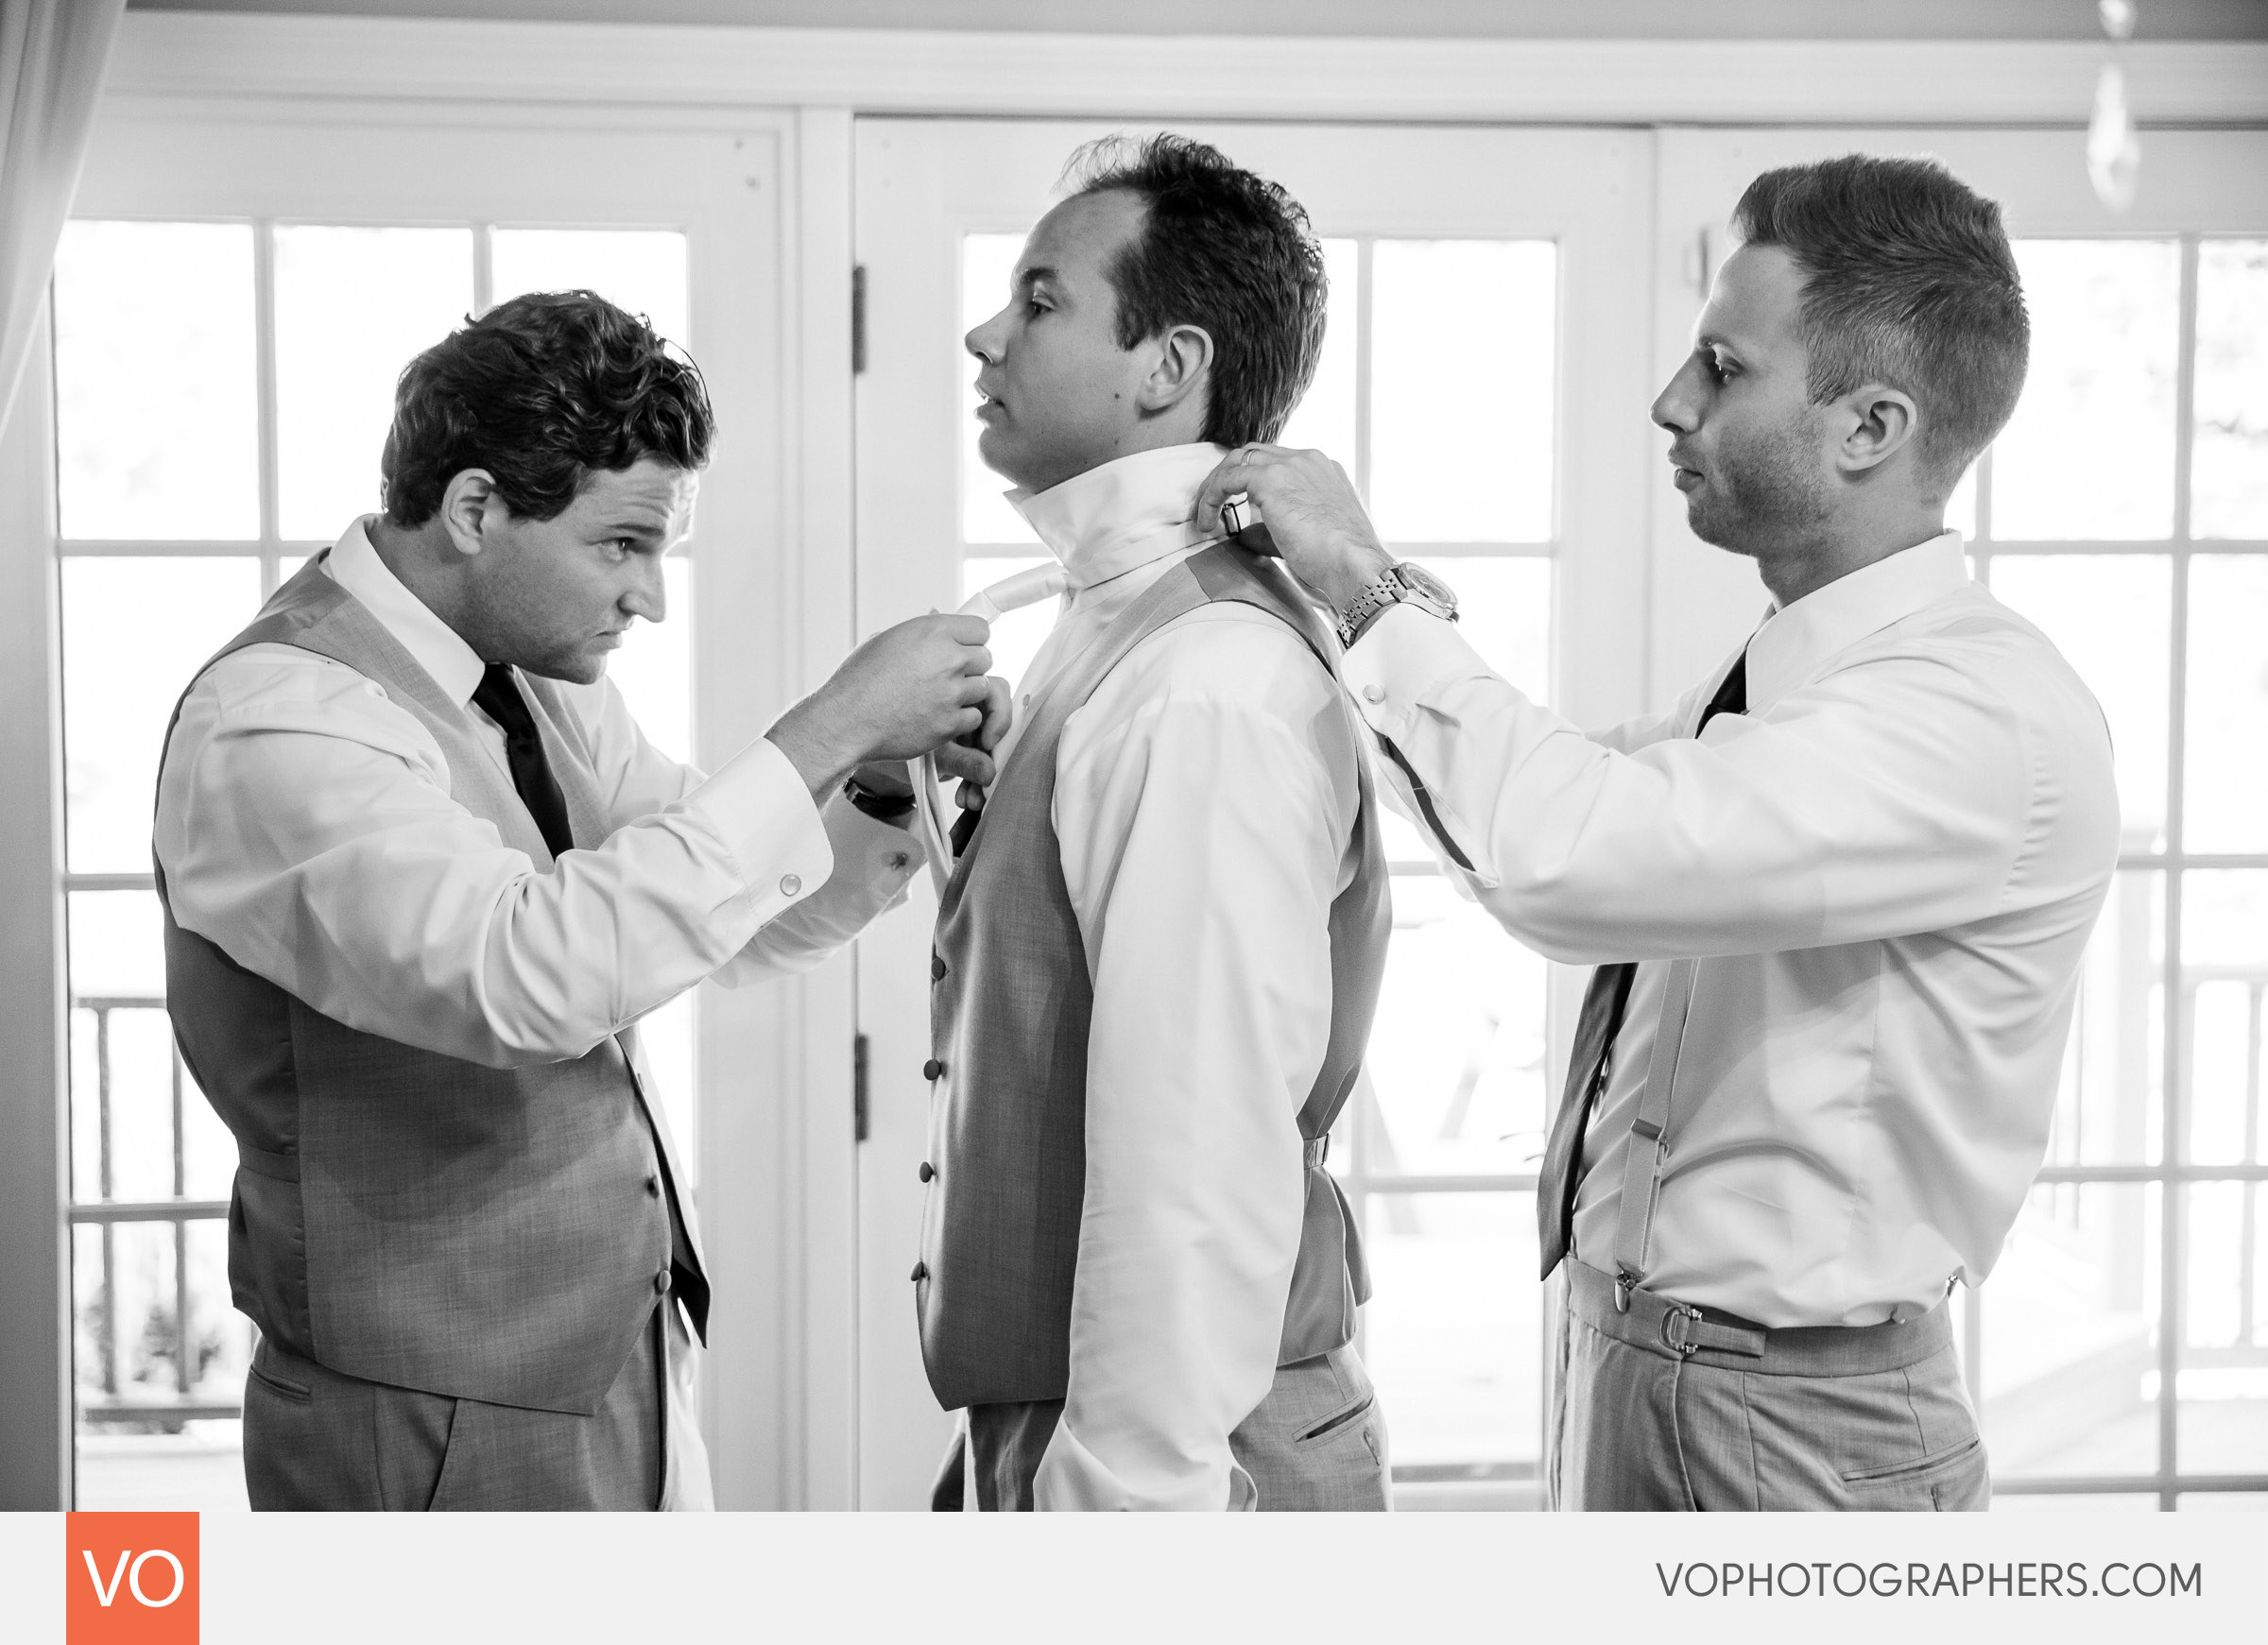 A little help from the groomsmen